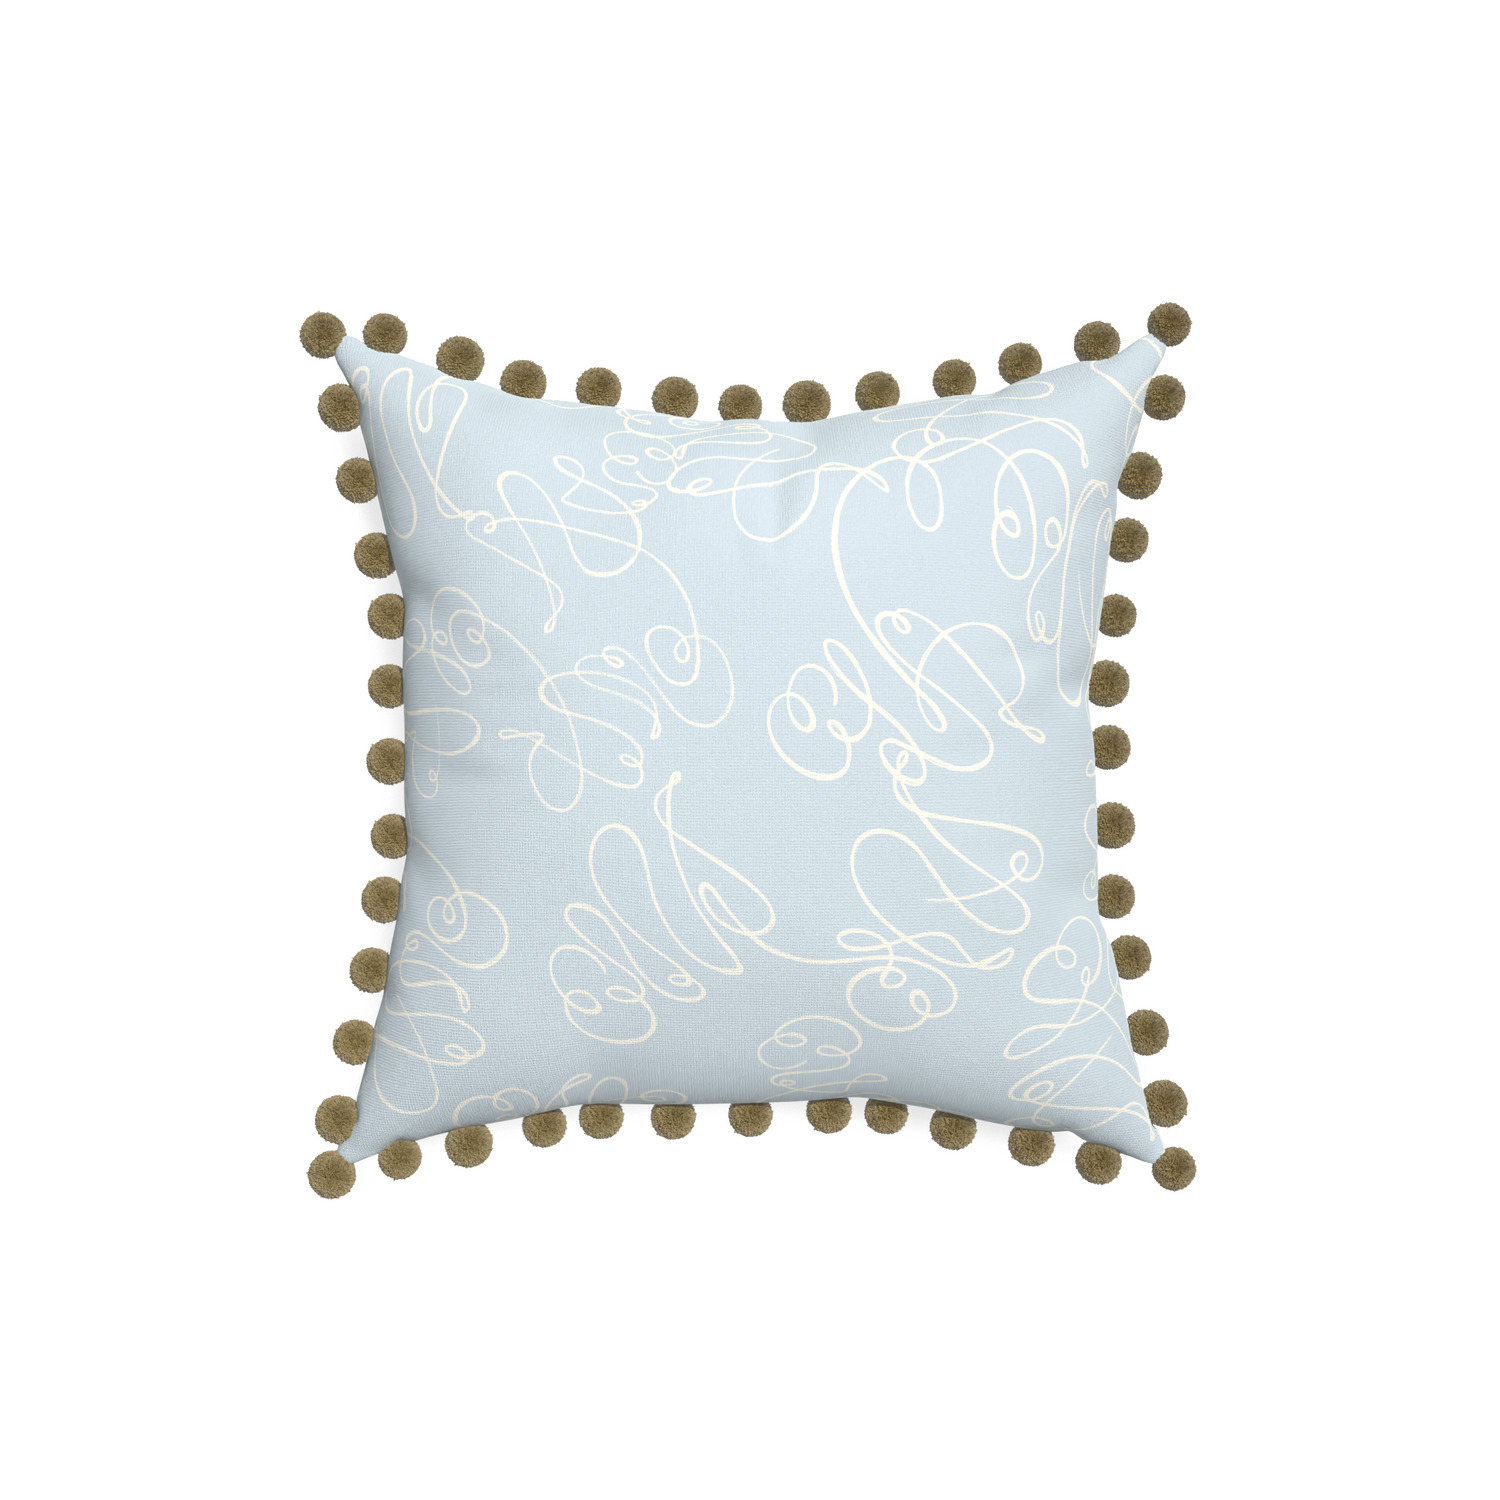 18-square mirabella custom powder blue abstractpillow with olive pom pom on white background